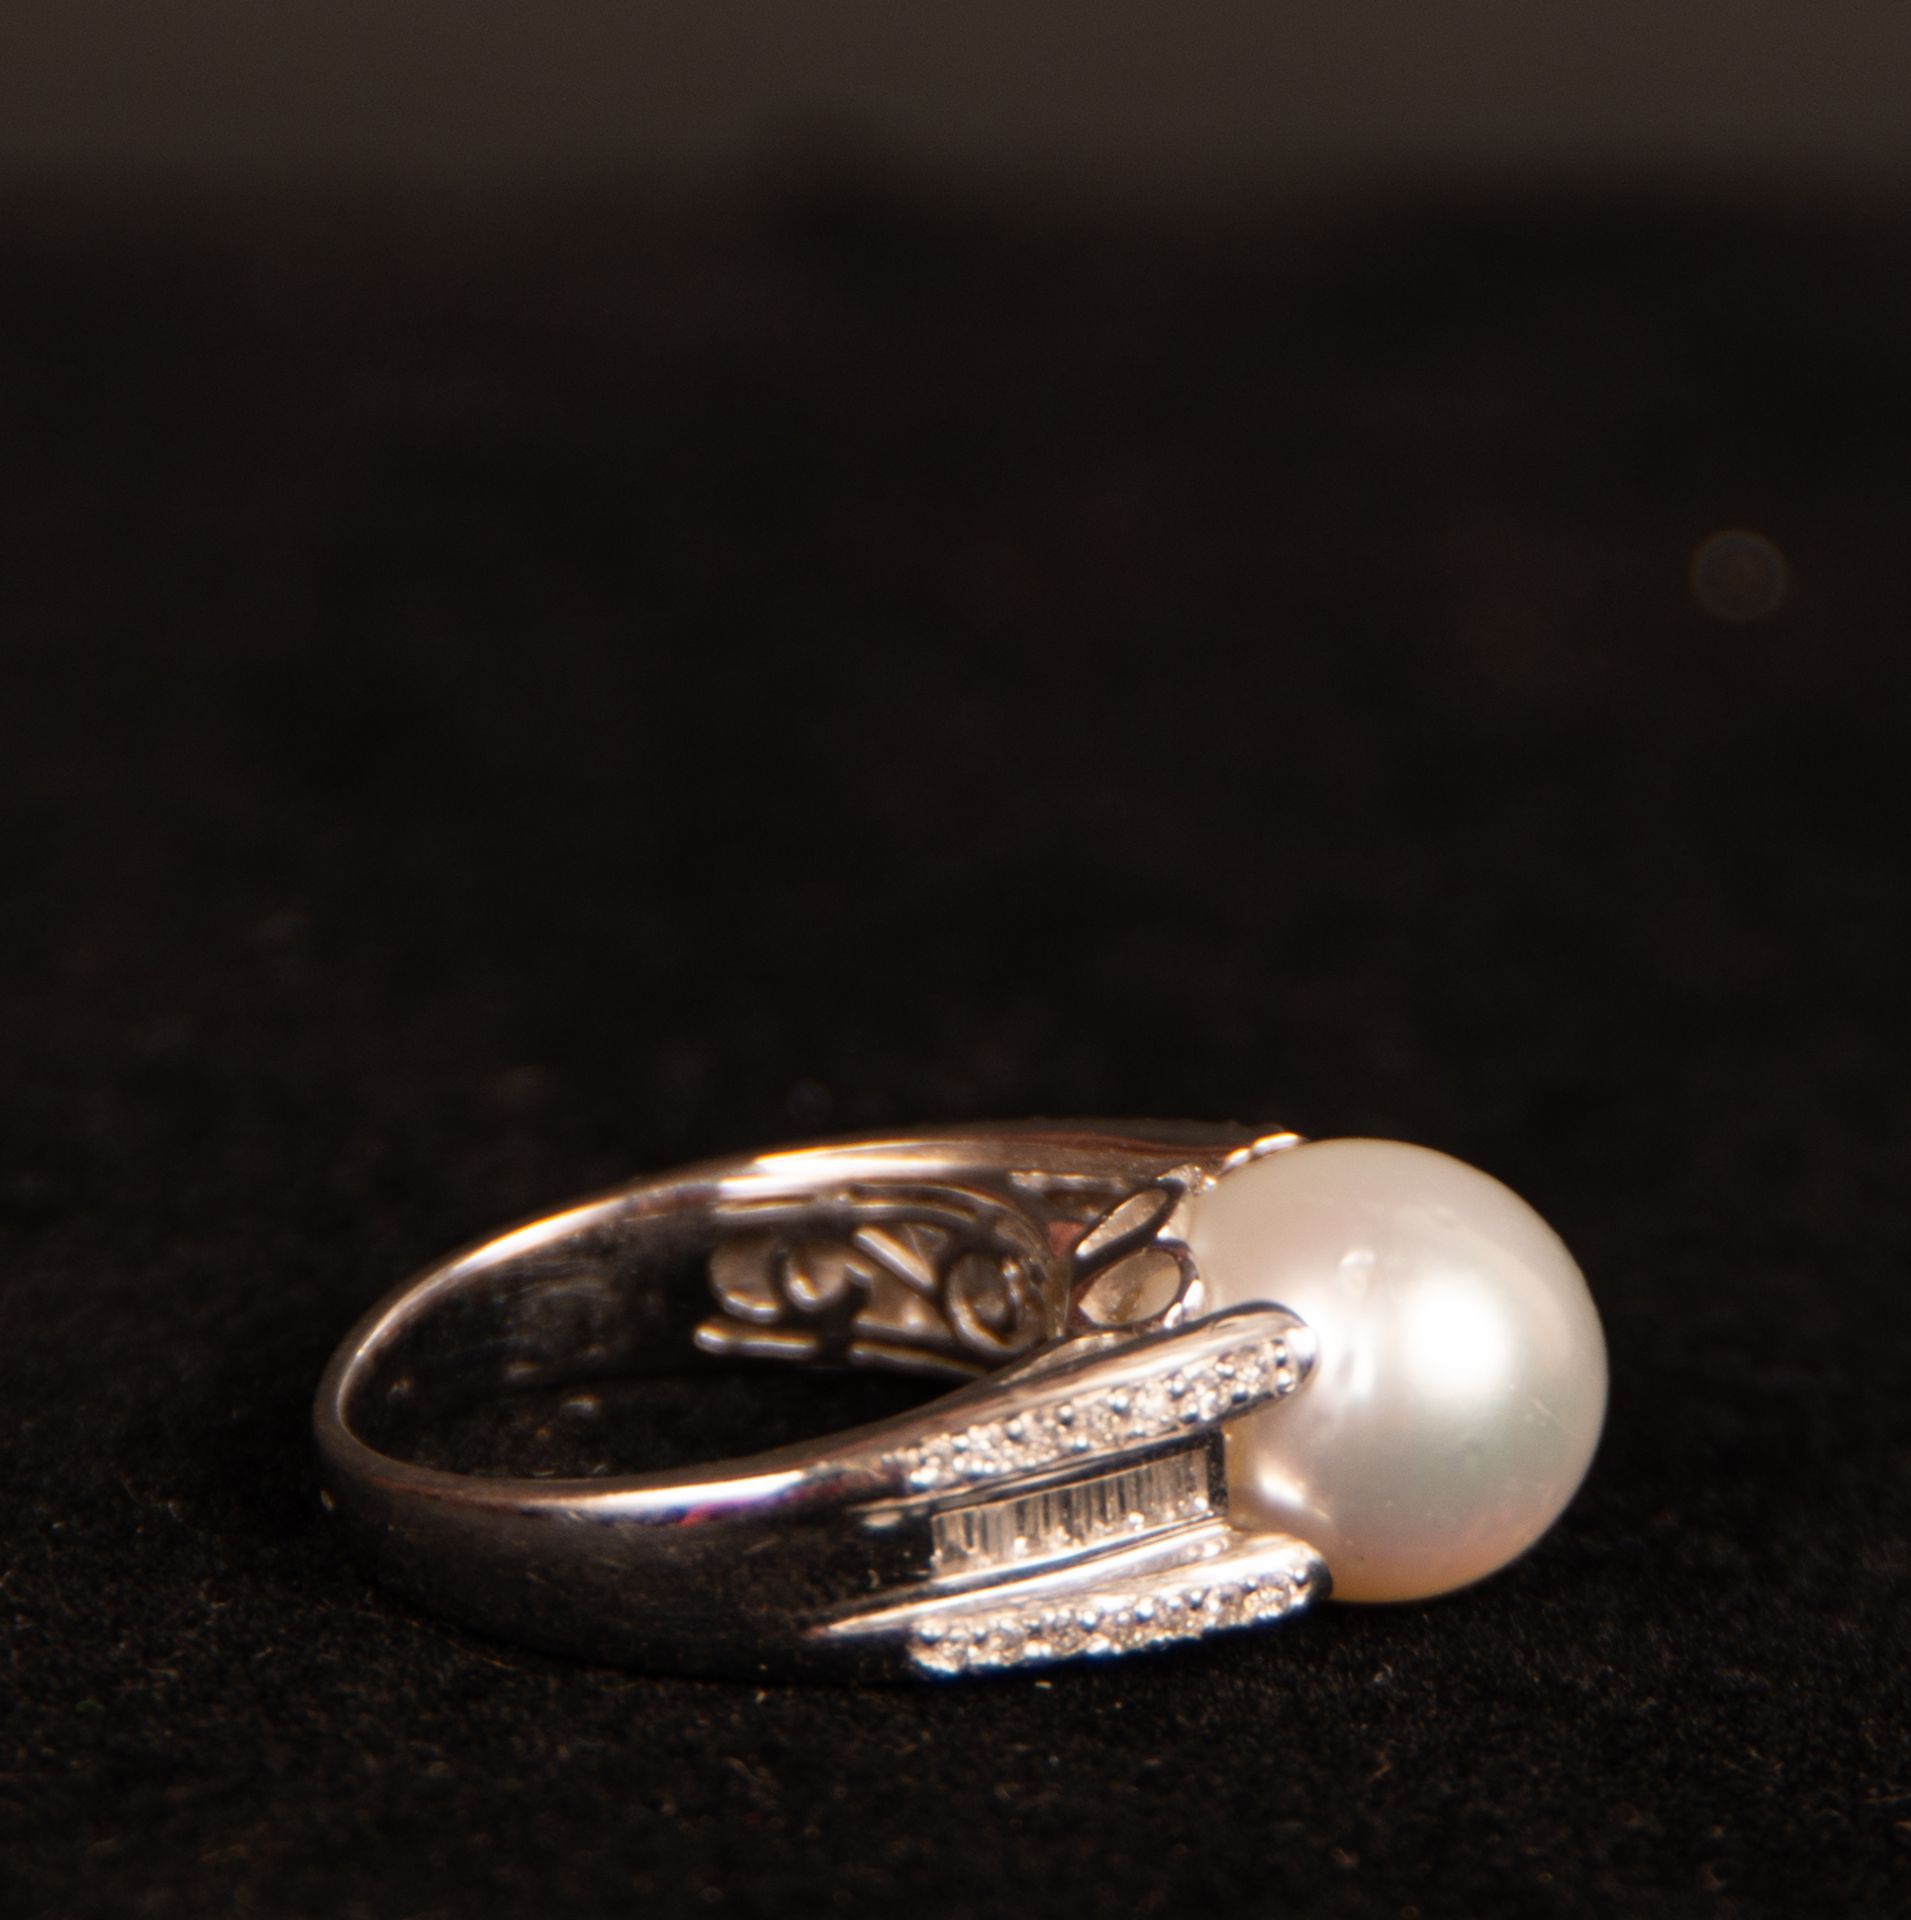 Ring in White Gold with a central Pearl and diamonds set - Image 3 of 4